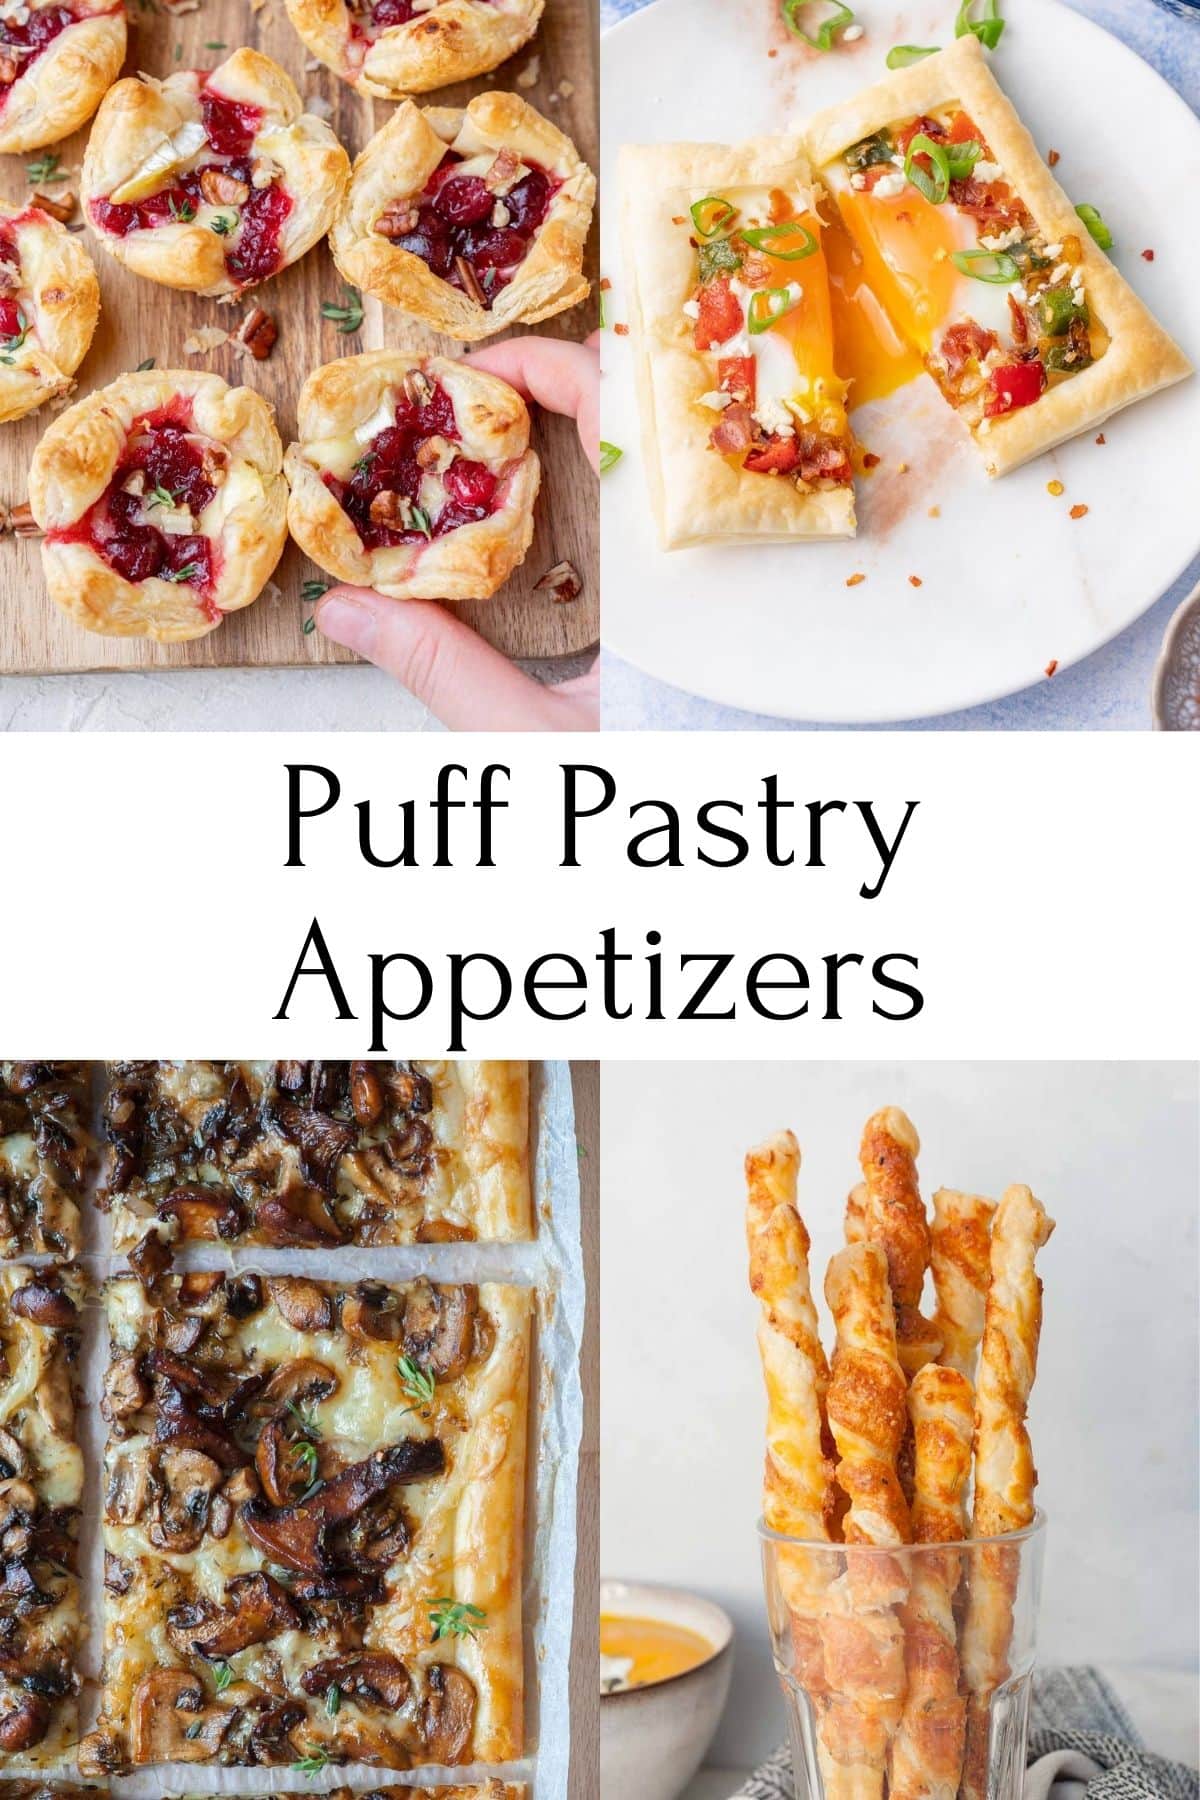 How To Cook With Puff Pastry - Nerveaside16